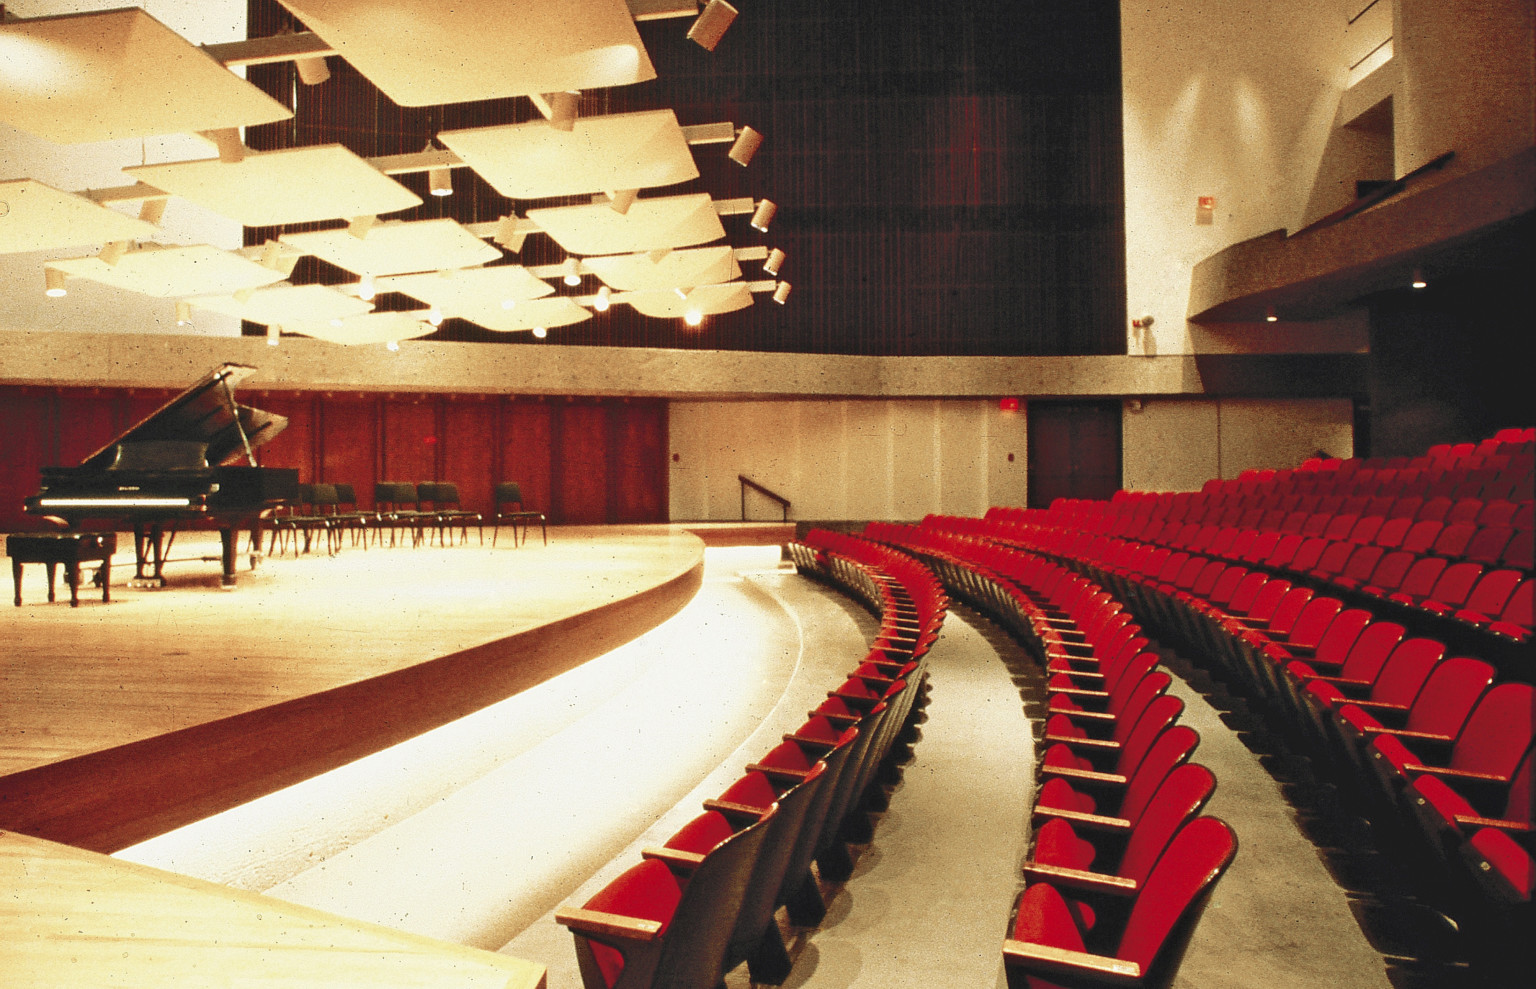 View inside UNO Performing Arts Complex theater. Rows of red seating face piano on stage under lights and acoustical panels